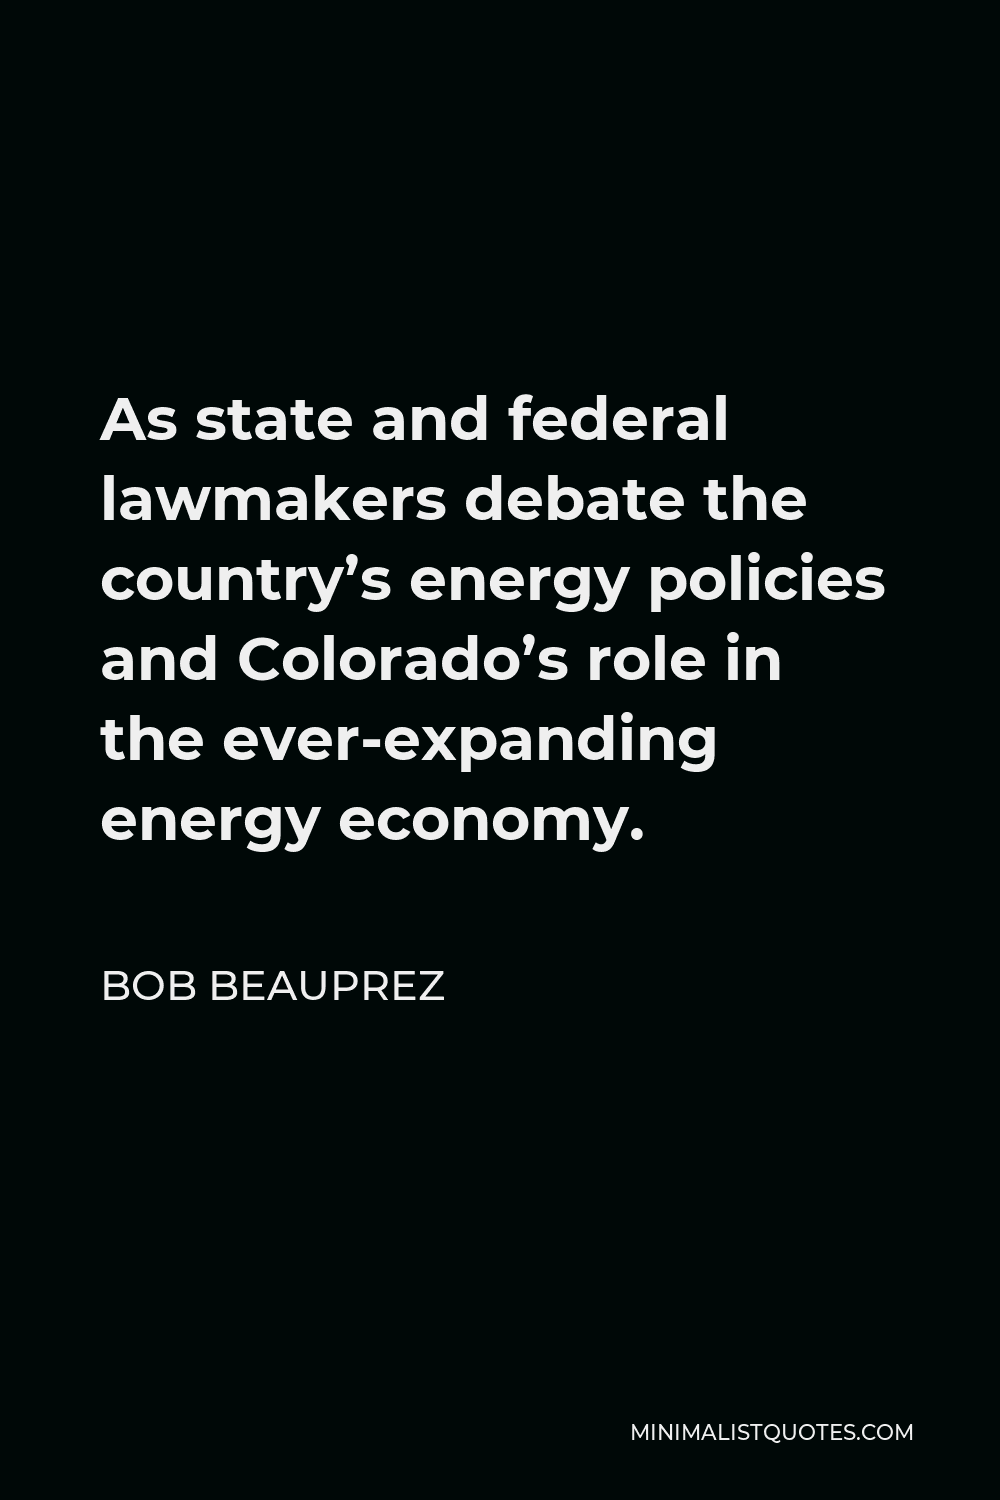 Bob Beauprez Quote - As state and federal lawmakers debate the country’s energy policies and Colorado’s role in the ever-expanding energy economy.